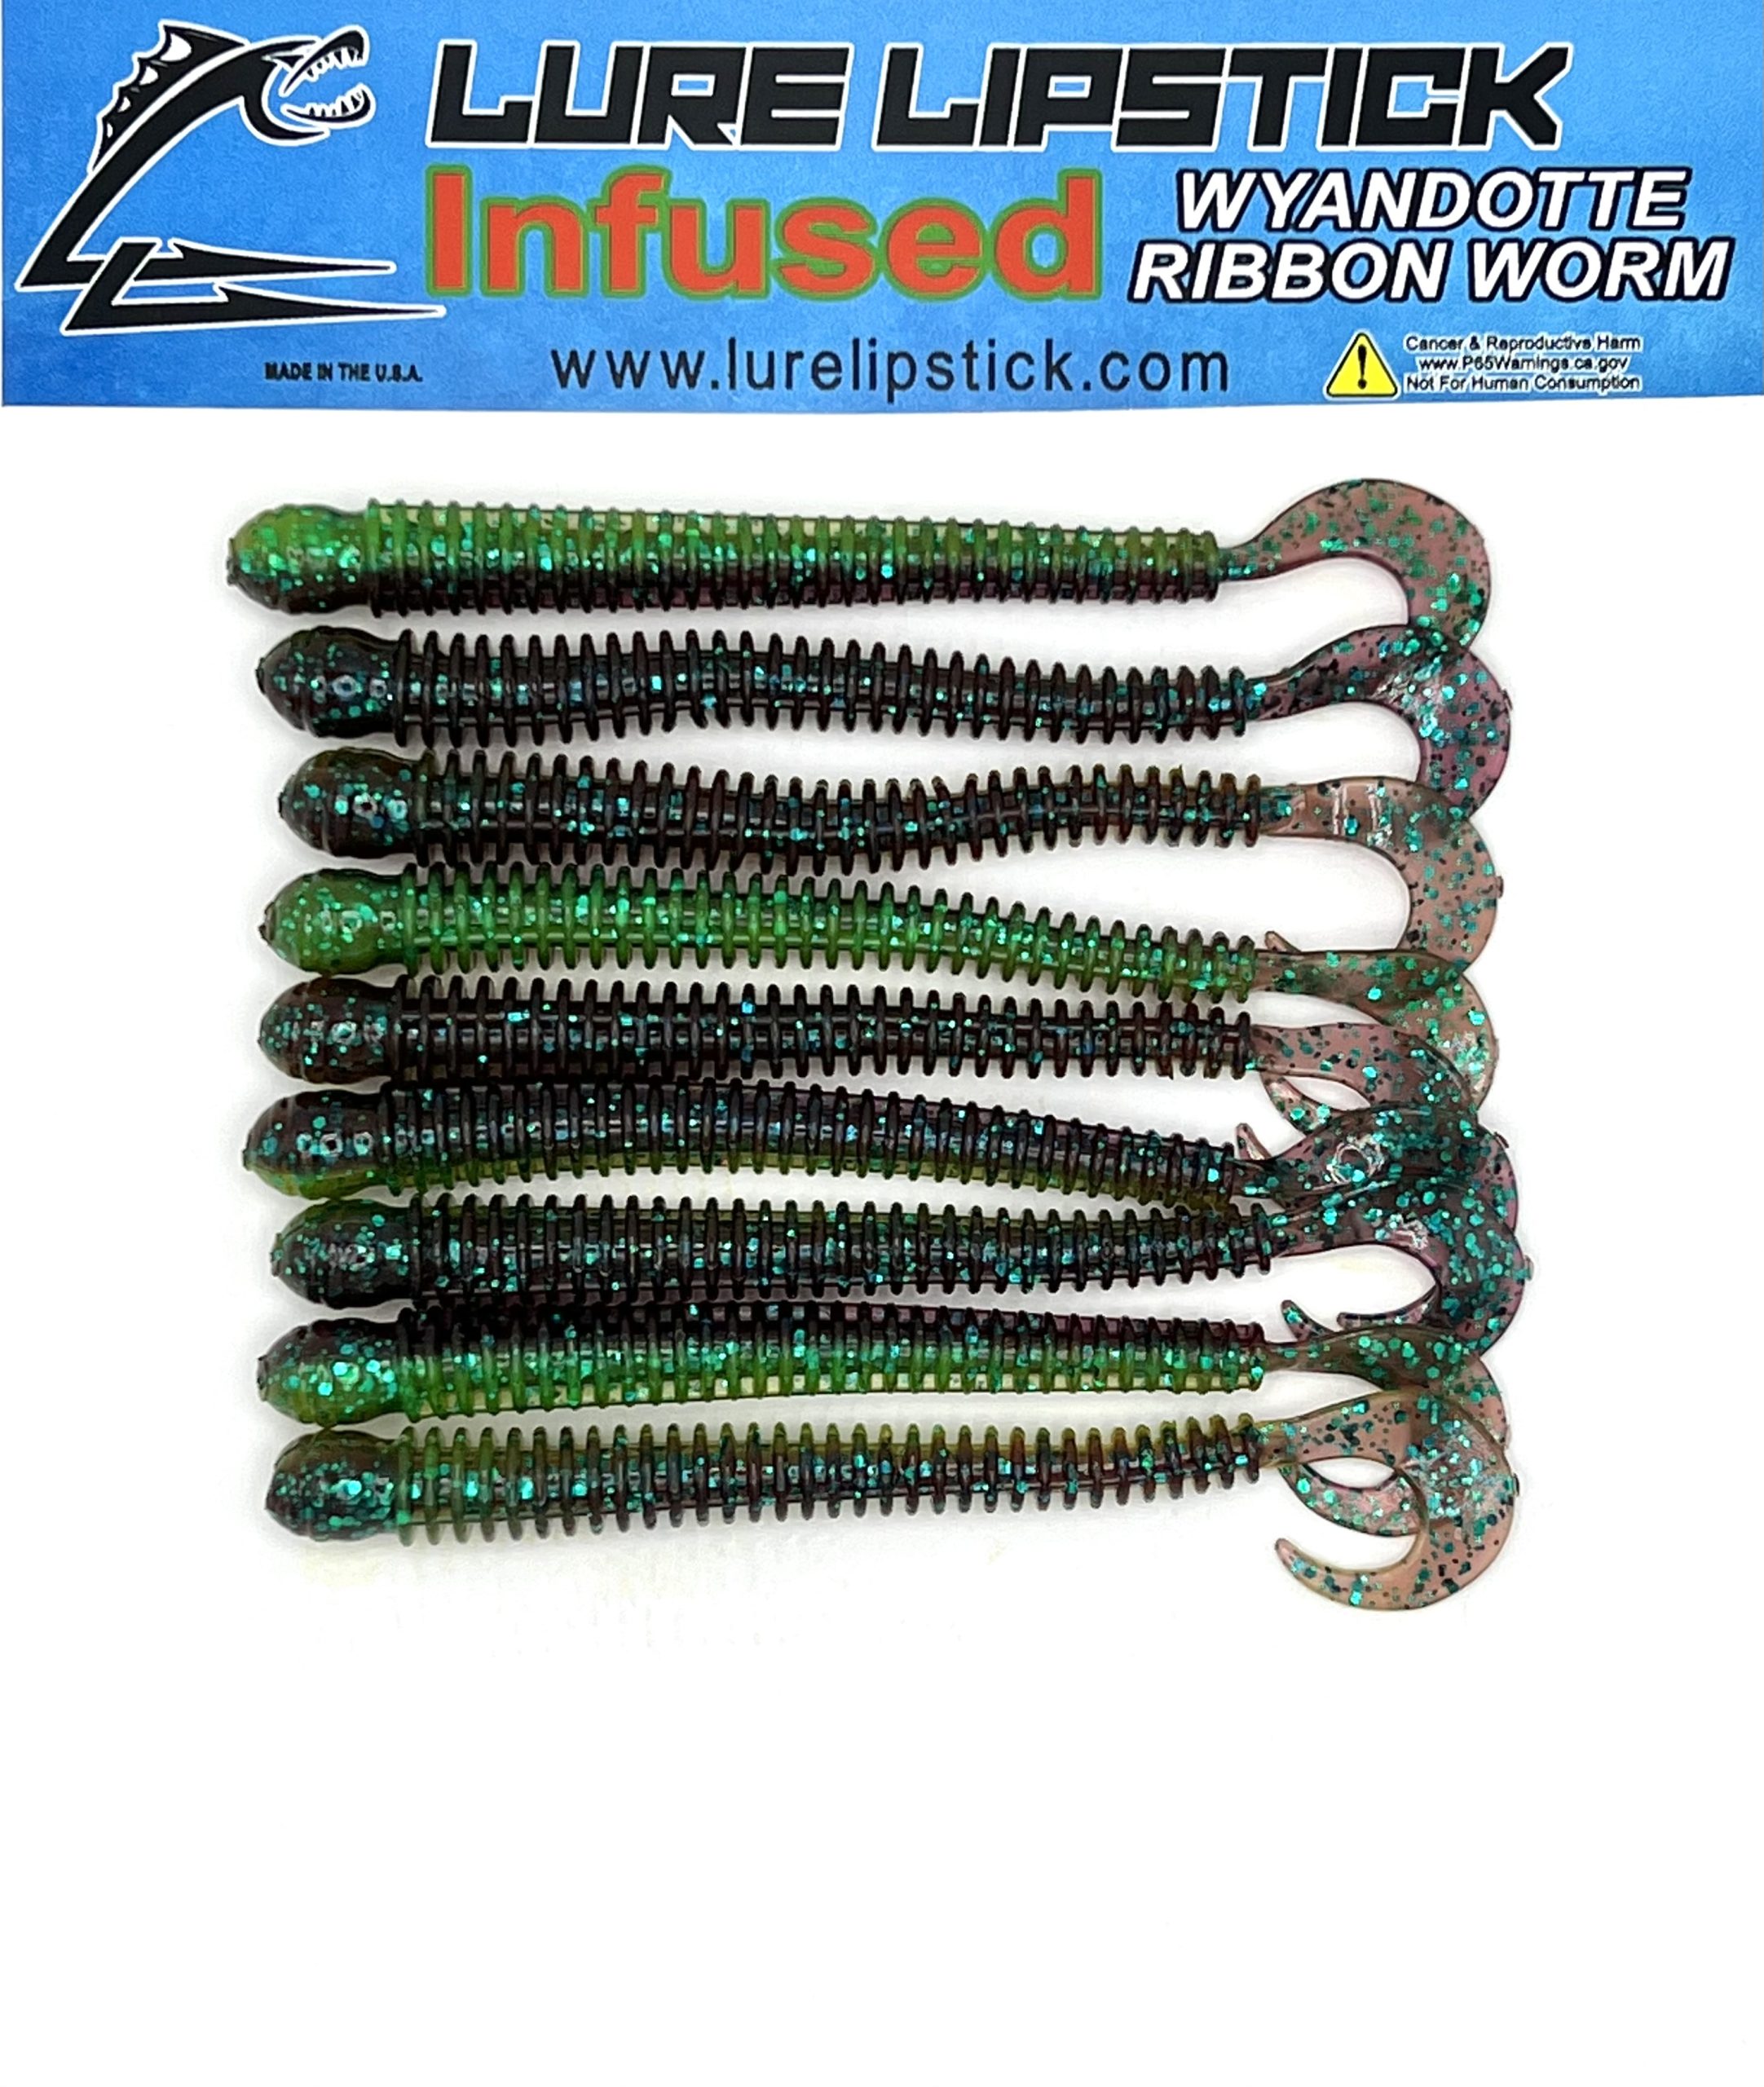 4 Inch 10 Pack Infused Custom Wyandotte Ribbon Worms – Sour Grape